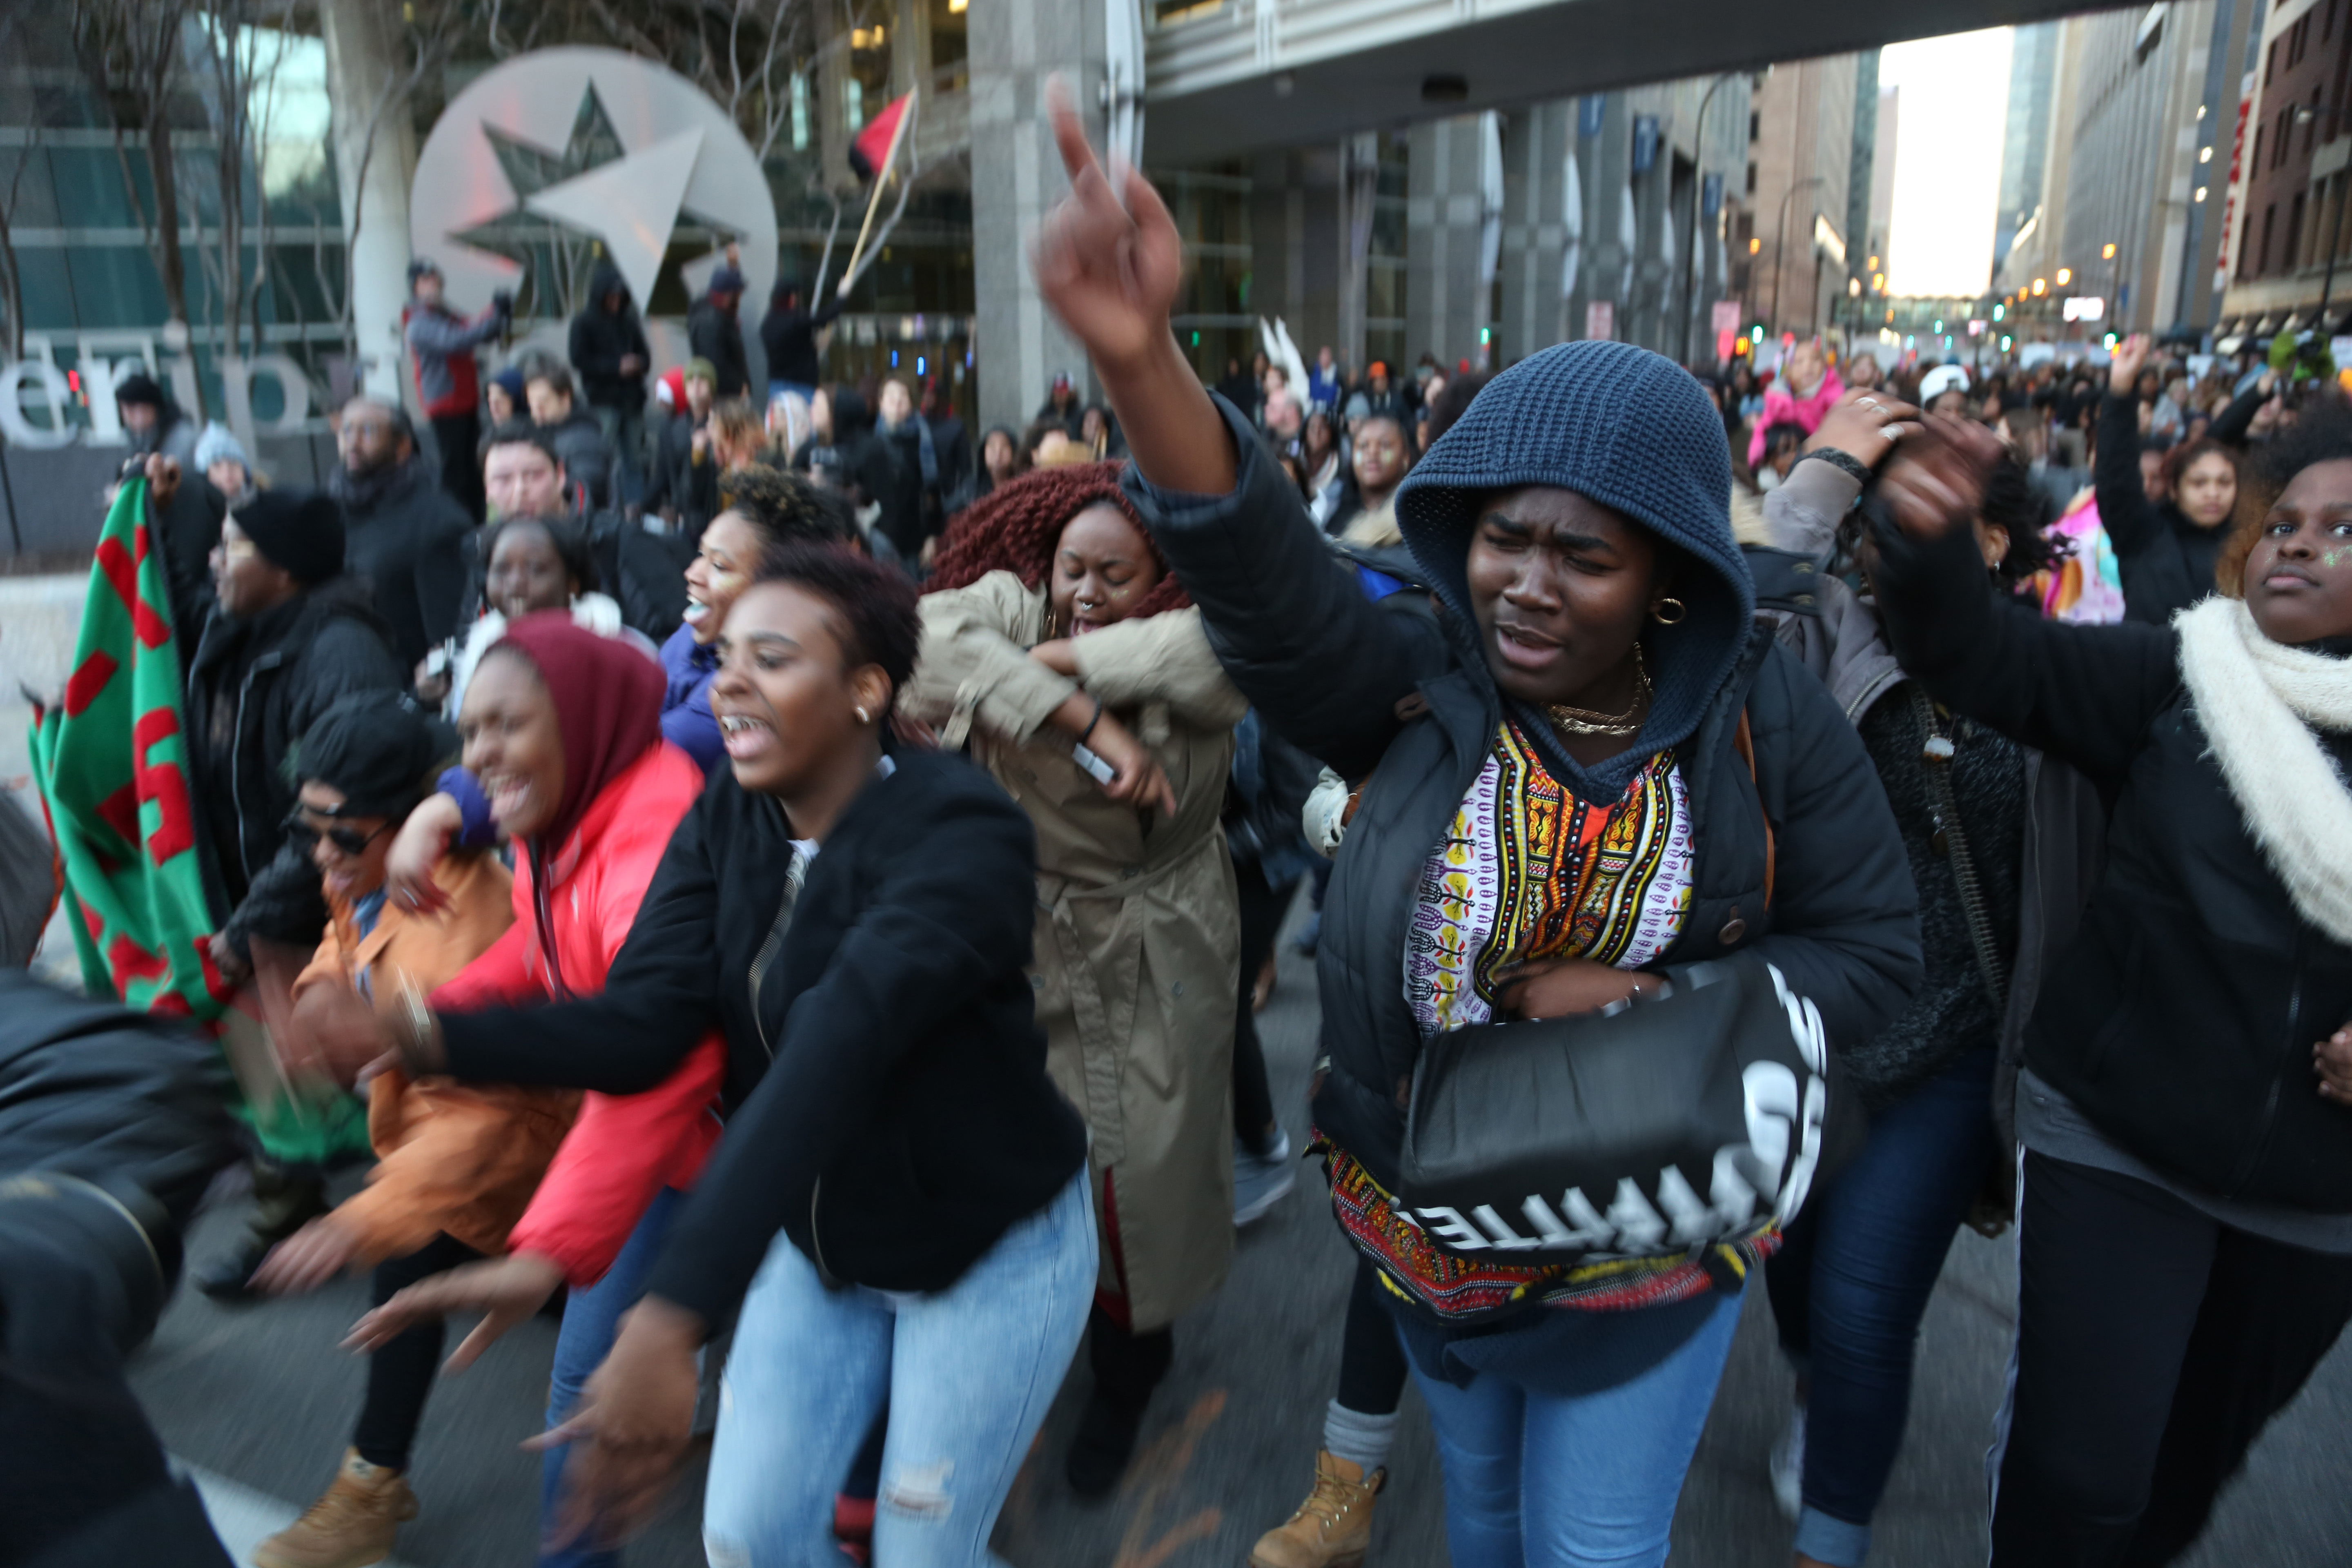 Protesters danced to music as they headed to the federal court house. ] (KYNDELL HARKNESS/STAR TRIBUNE) kyndell.harkness@startribune.com Protesters at the Minneapolis Fourth Precinct in Minneapolis Min., Saturday November 24, 2015.